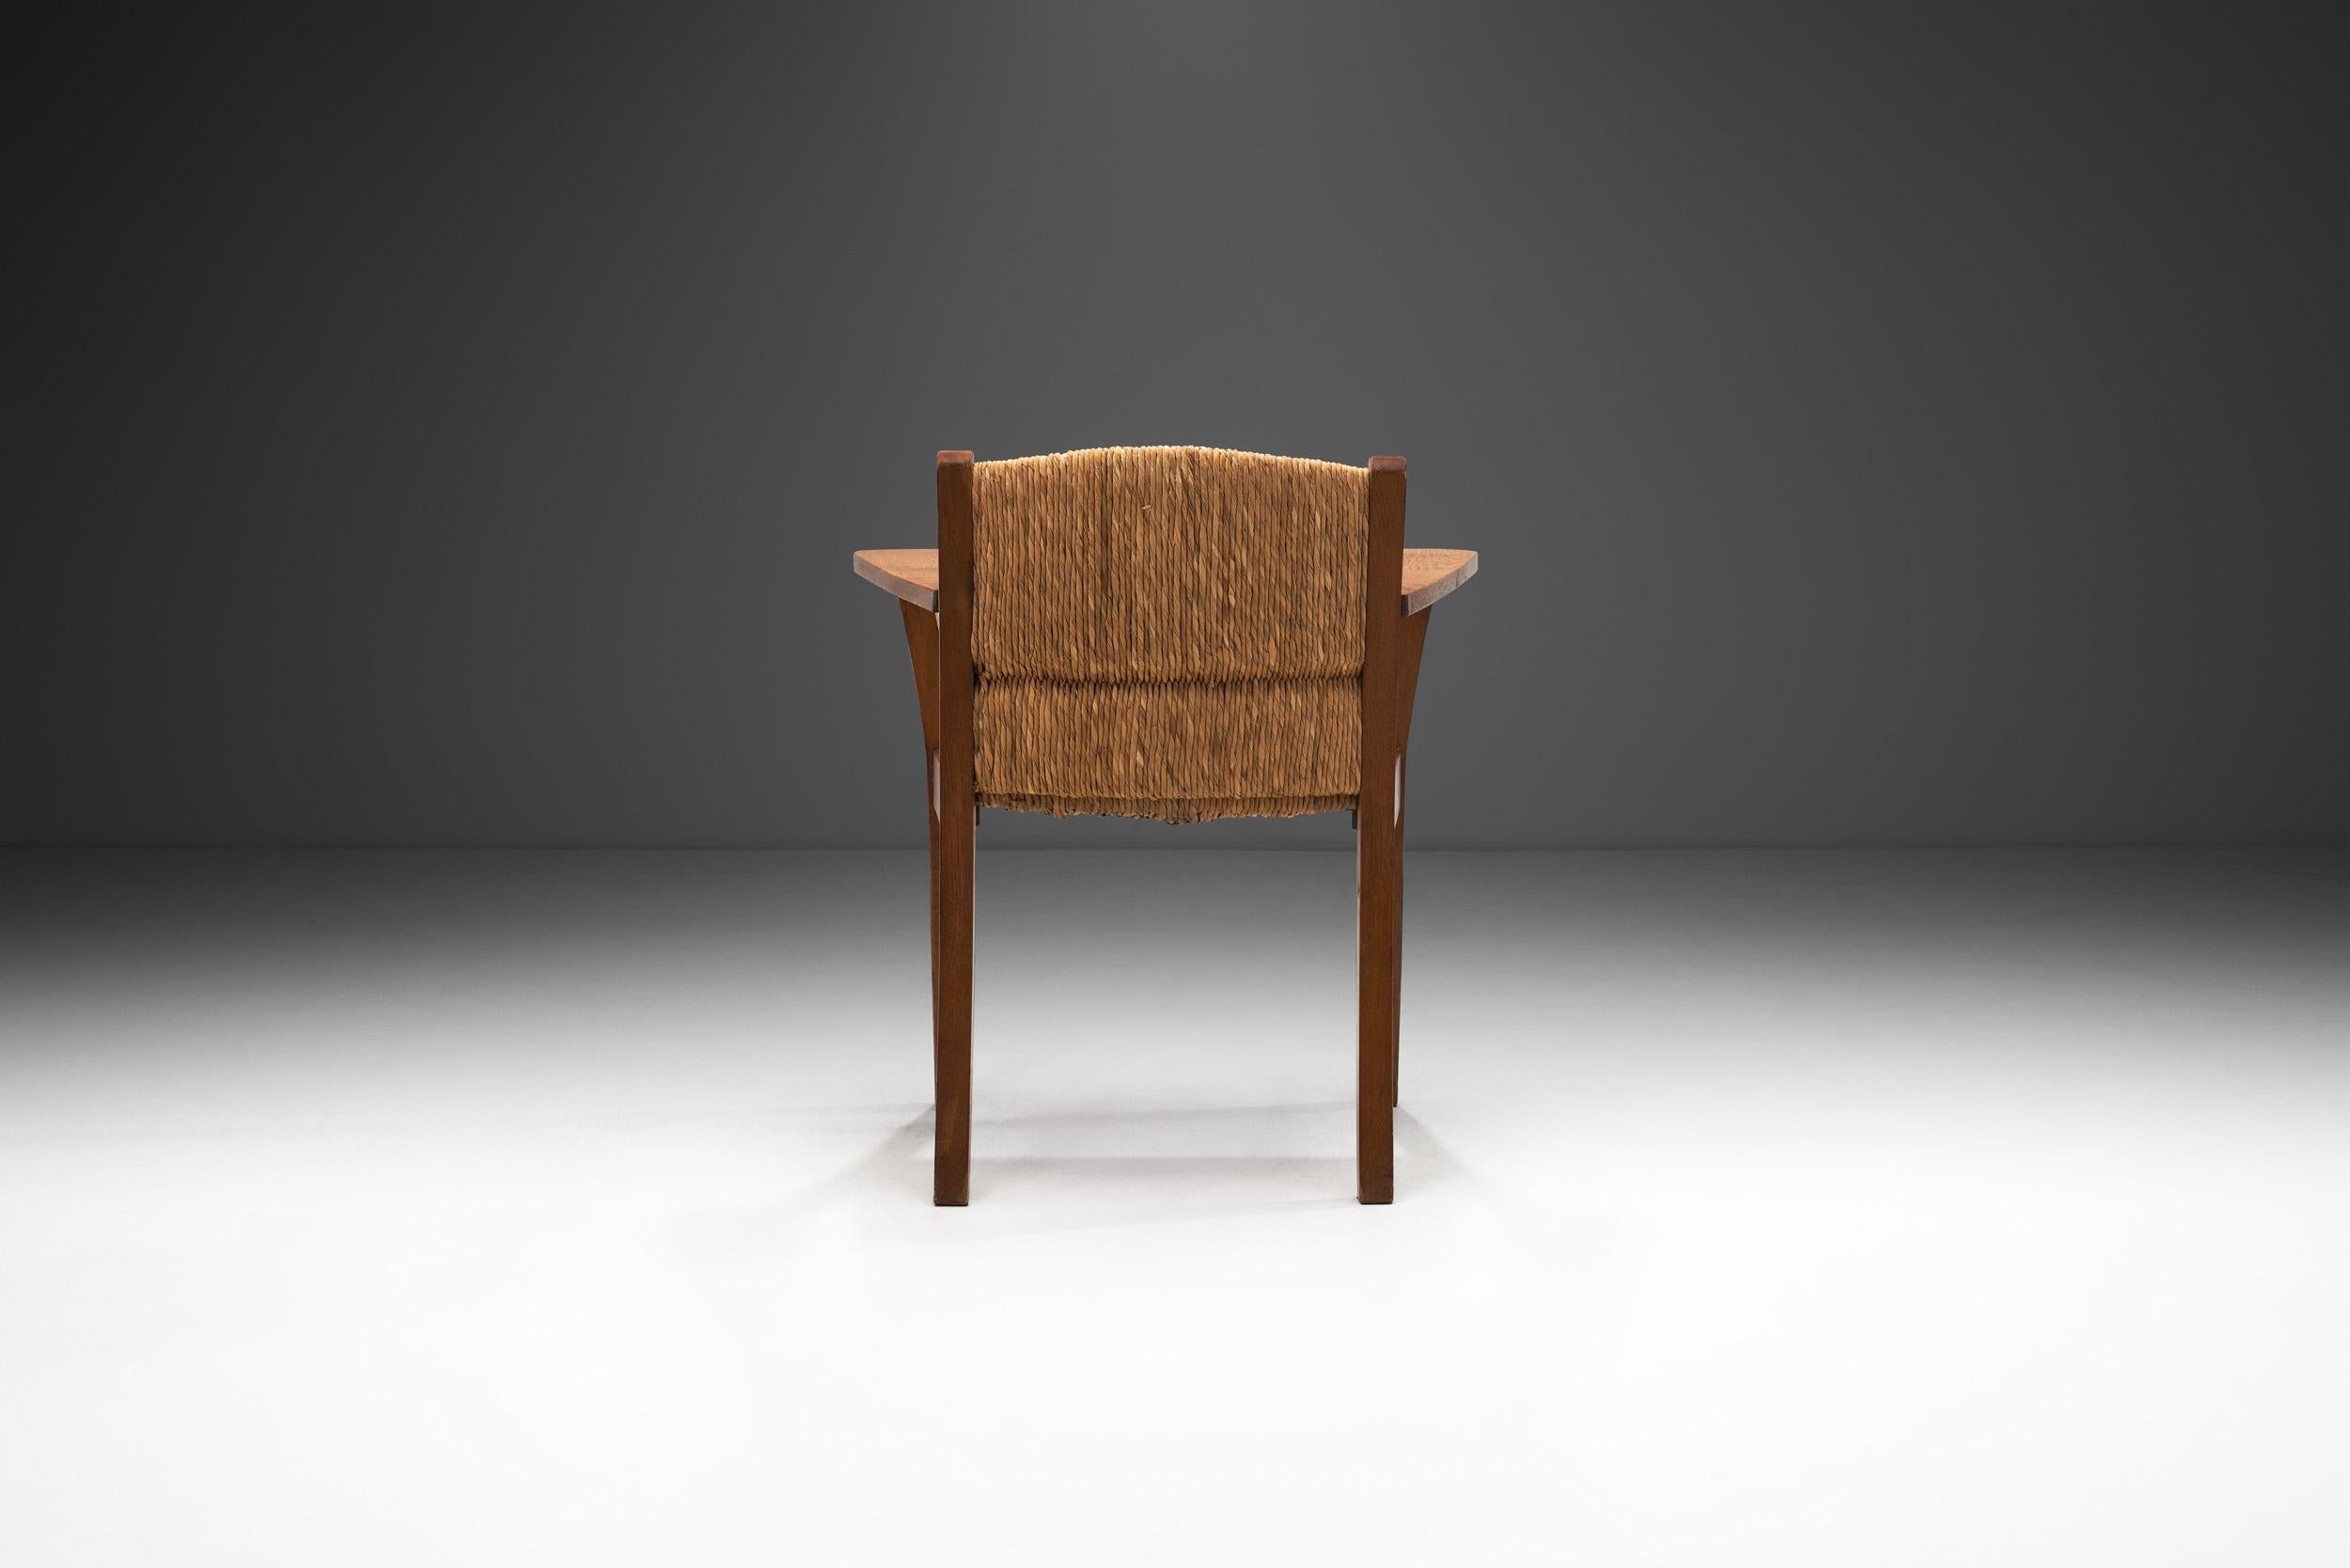 Early 20th Century Oak Worpsweder Armchair by Willi Ohler for Erich Schultz, Germany 1920s For Sale